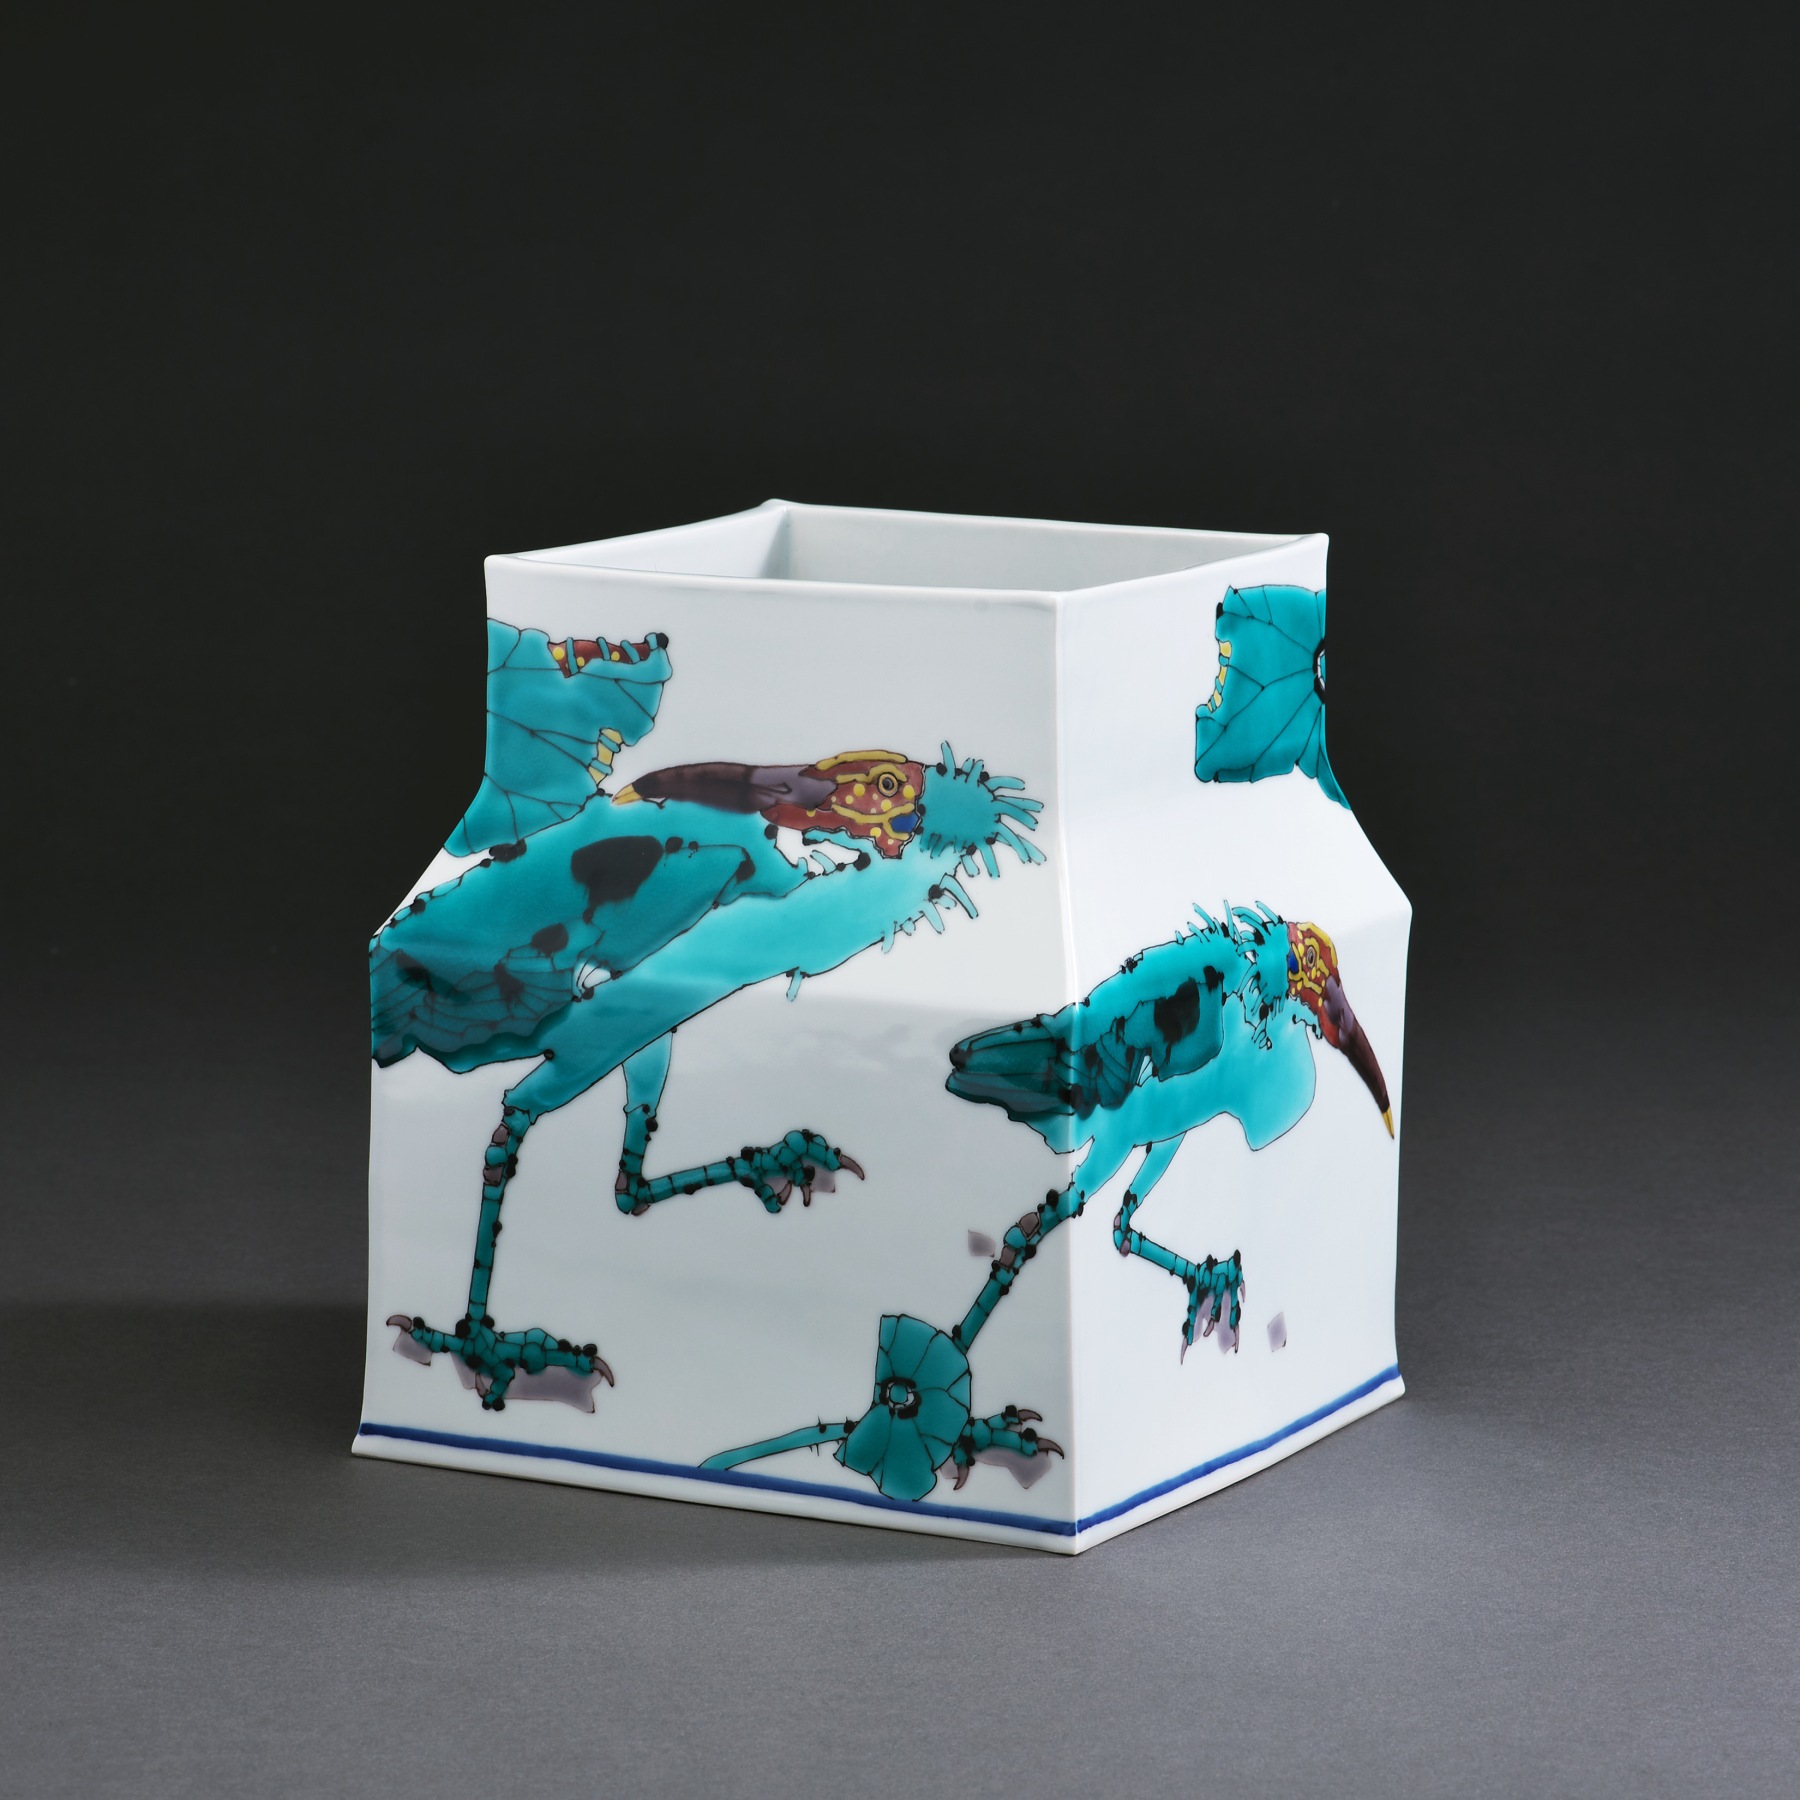 Square vessel with sloped shoulders depicting scenes of Japanese crested ibises, 2017